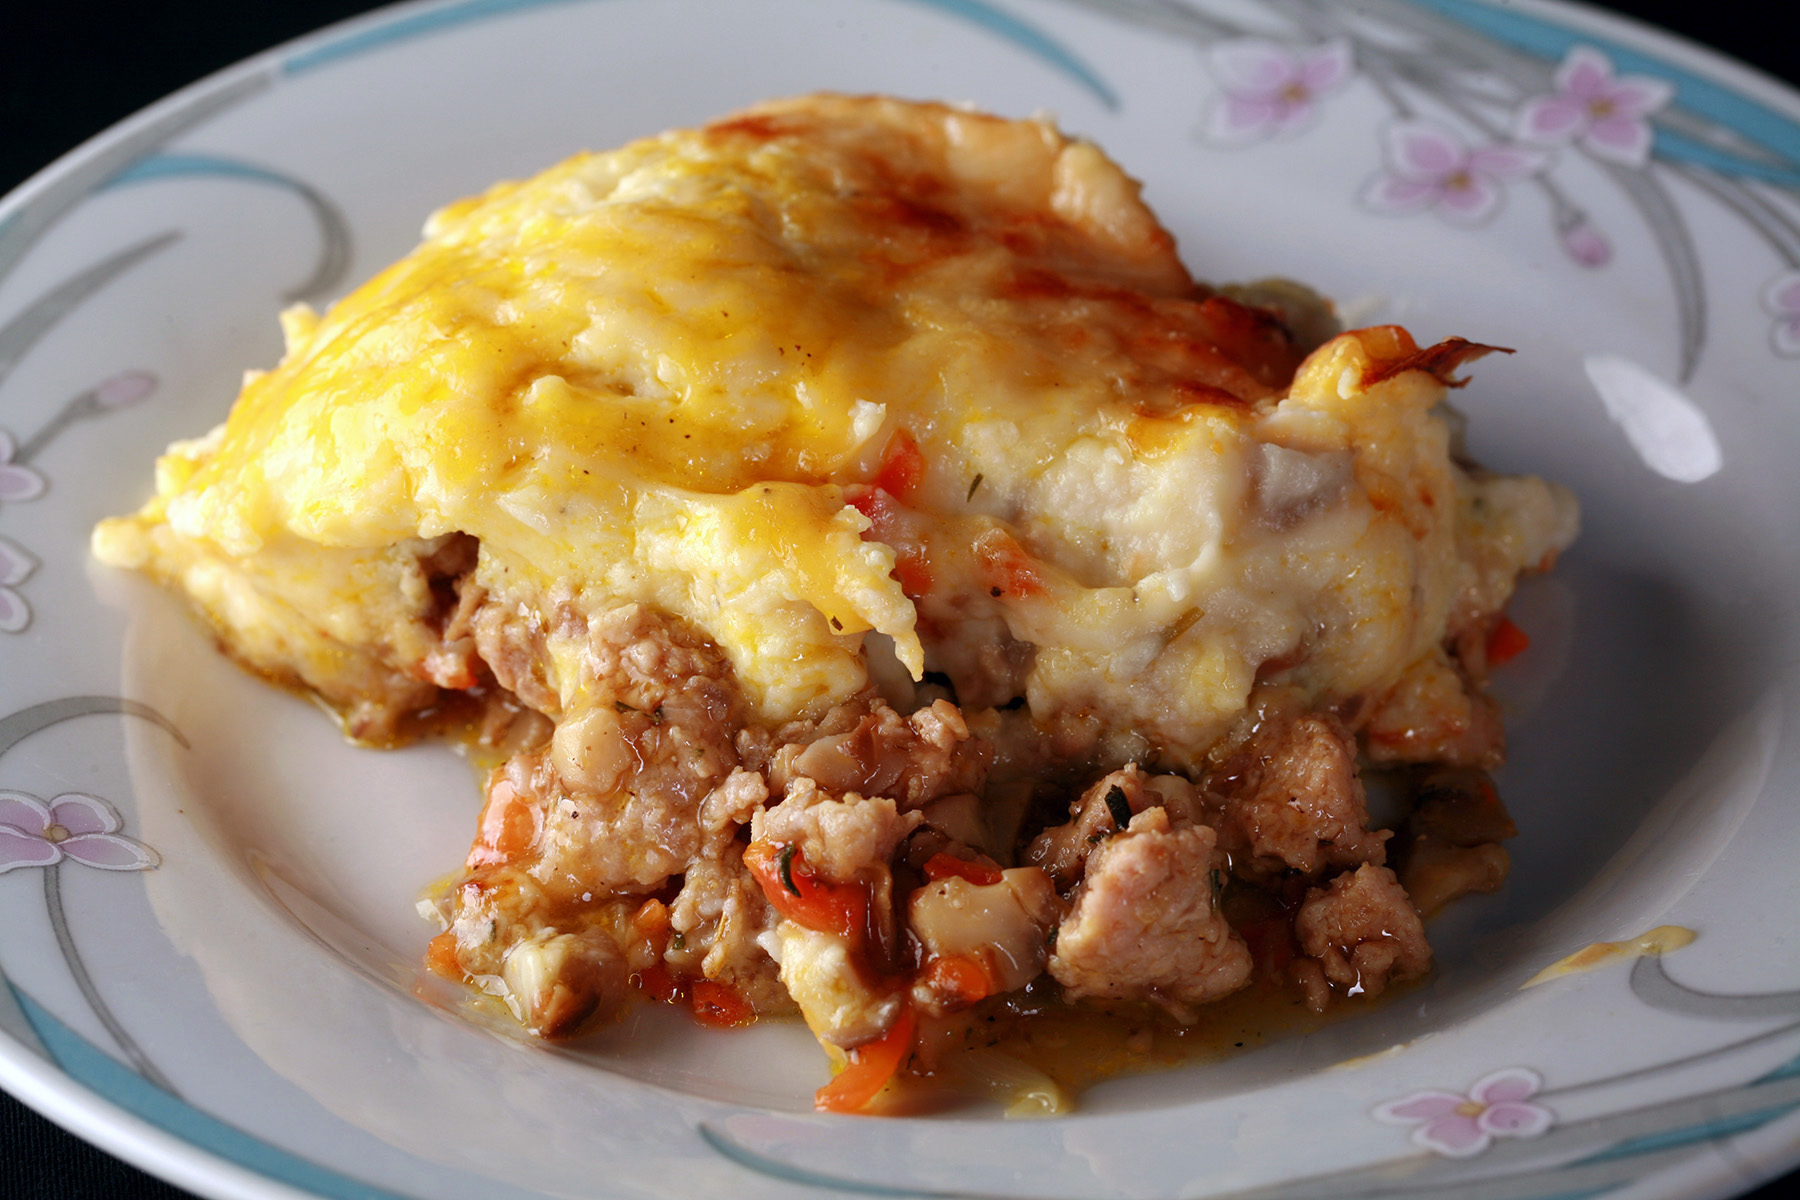 A serving of low carb Shepherd’s Pie on a white plate.